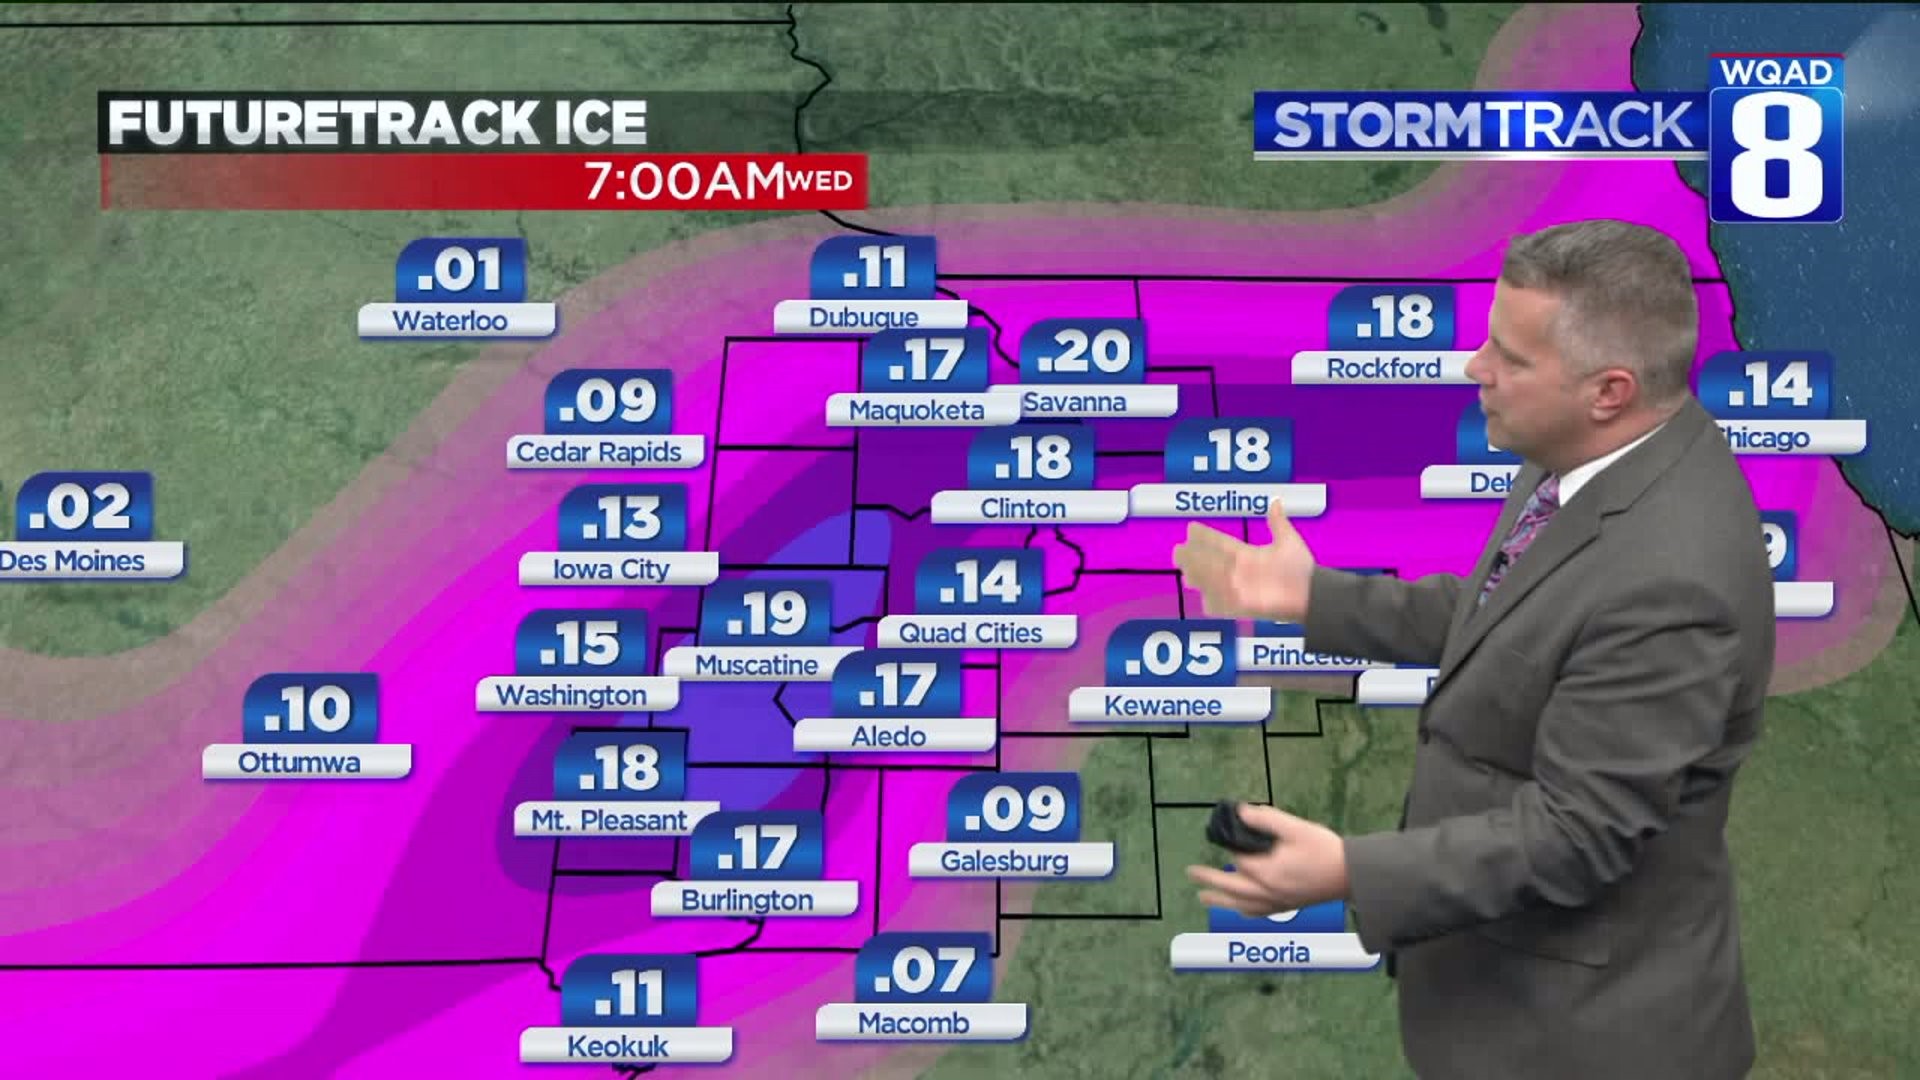 Significant ice accumulations expected